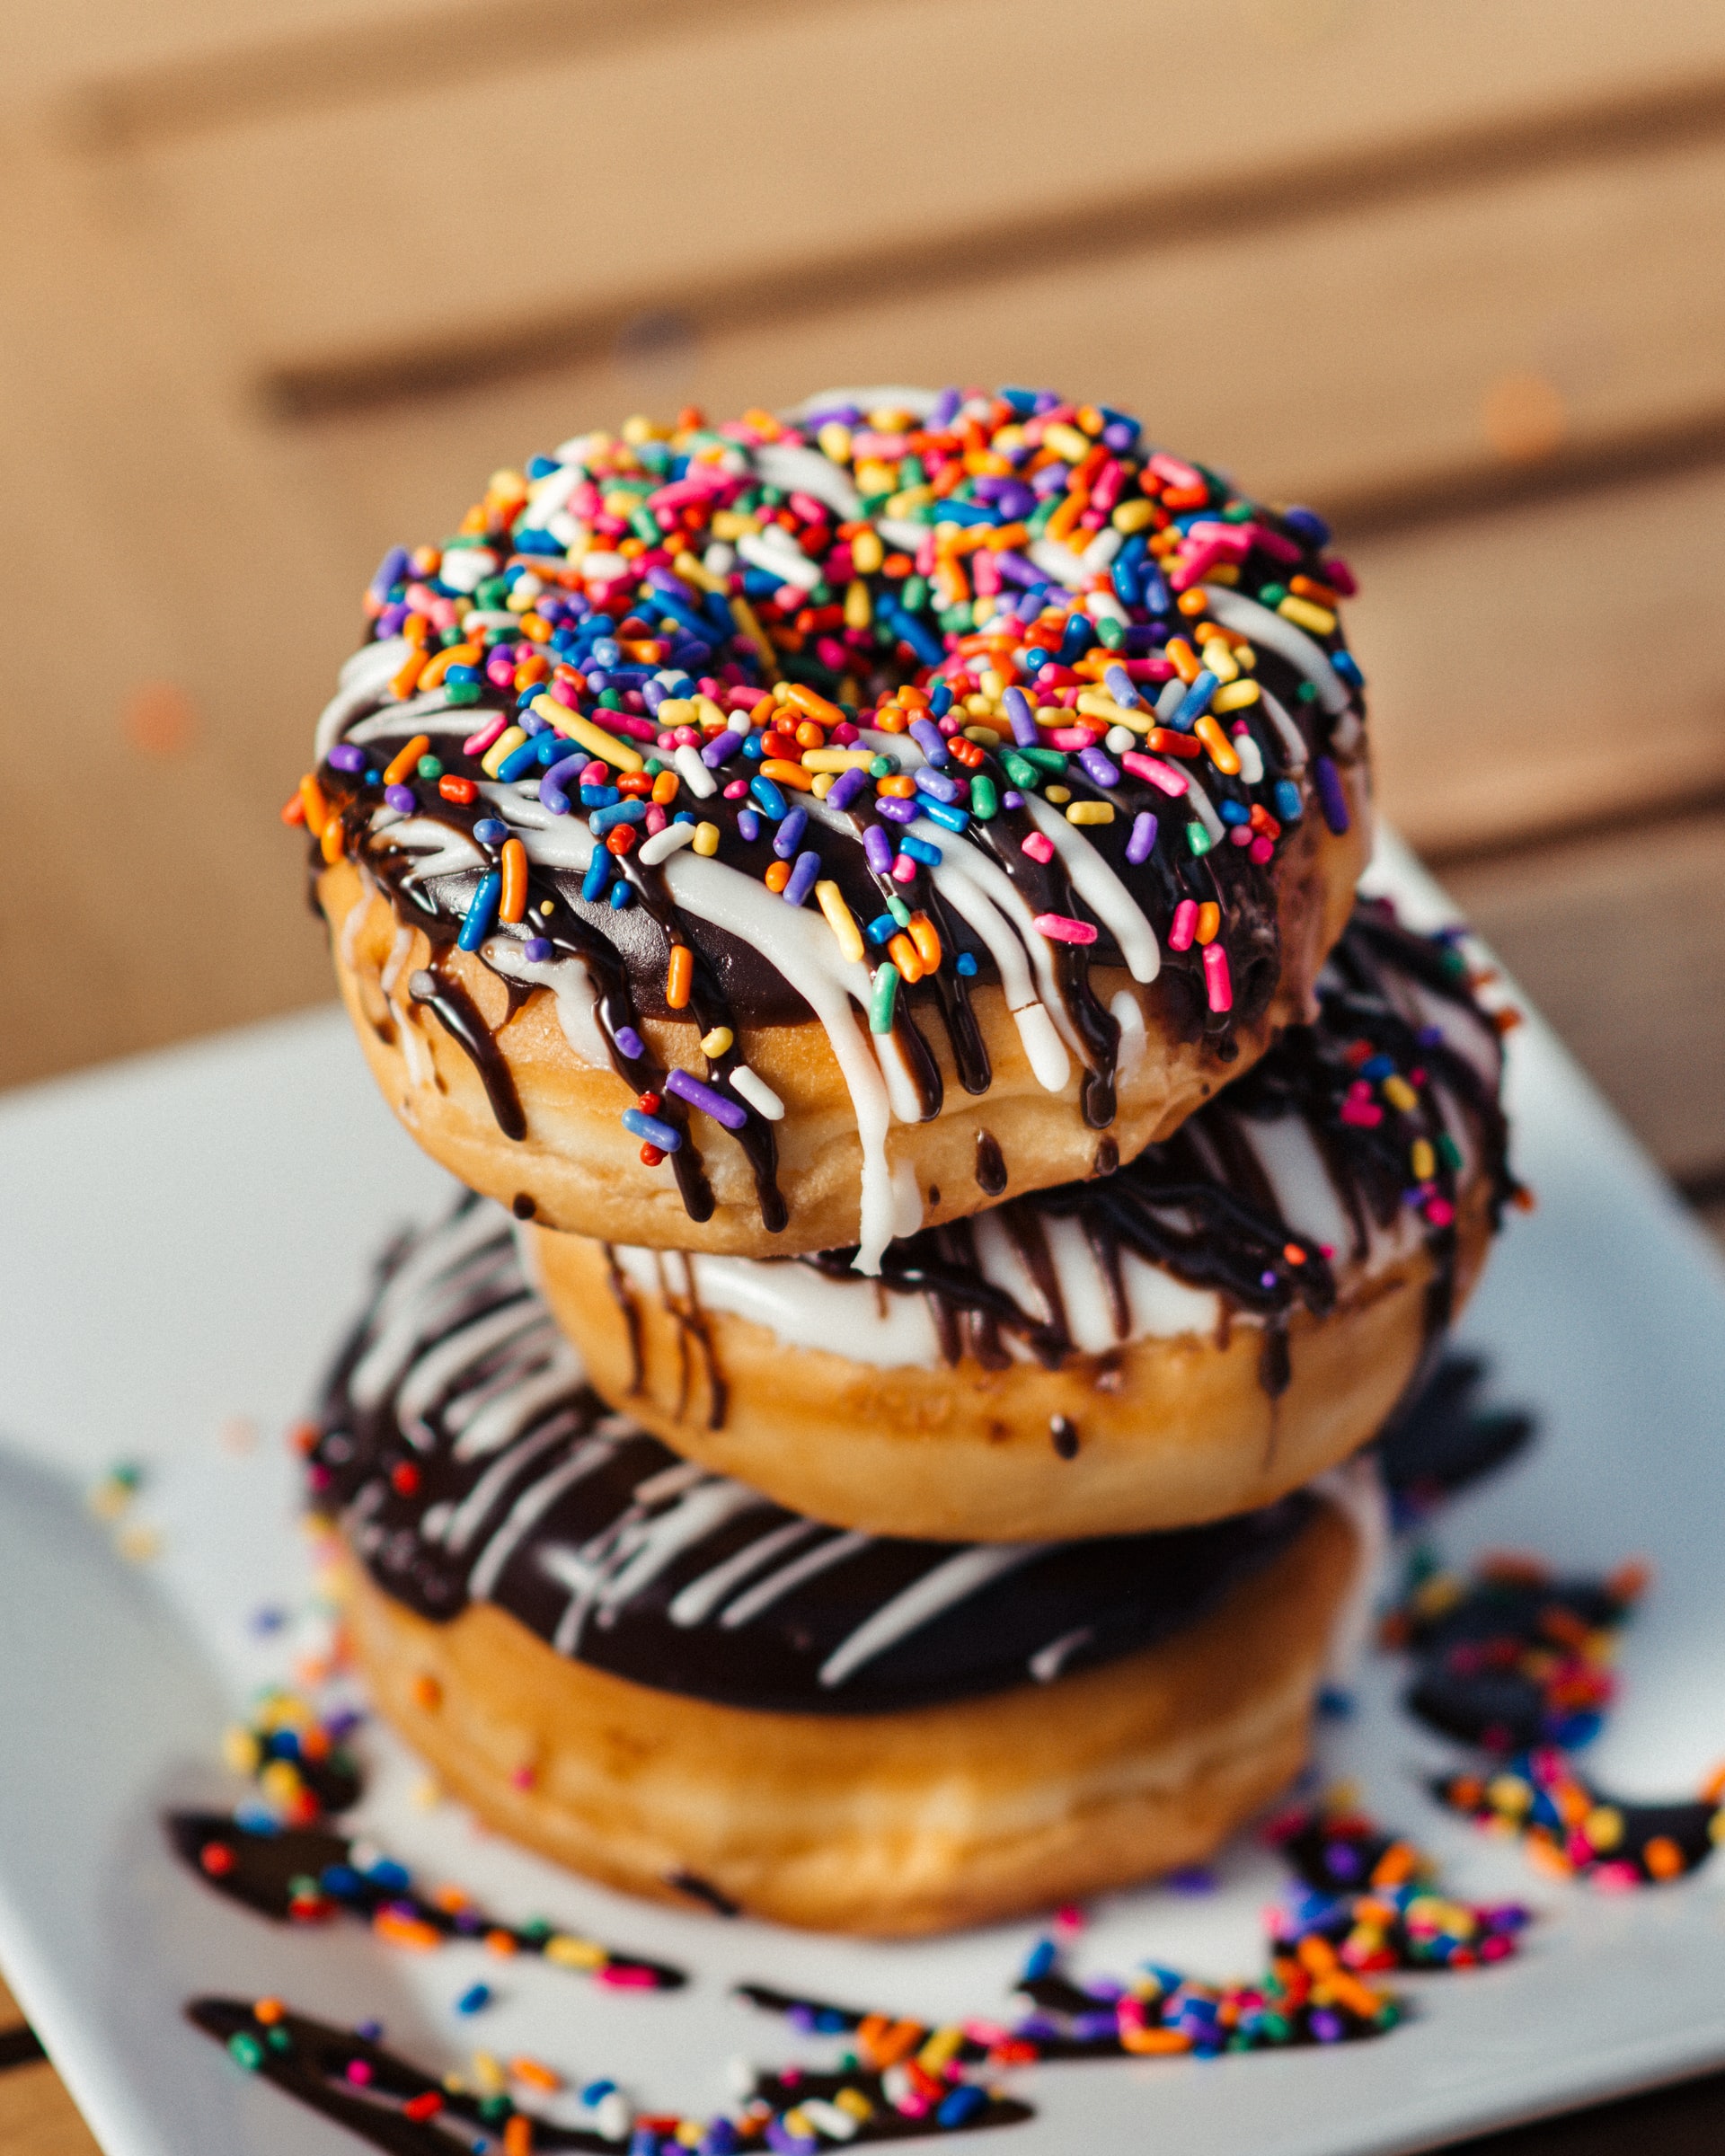 Celebrate National Donut Day on June 3rd!